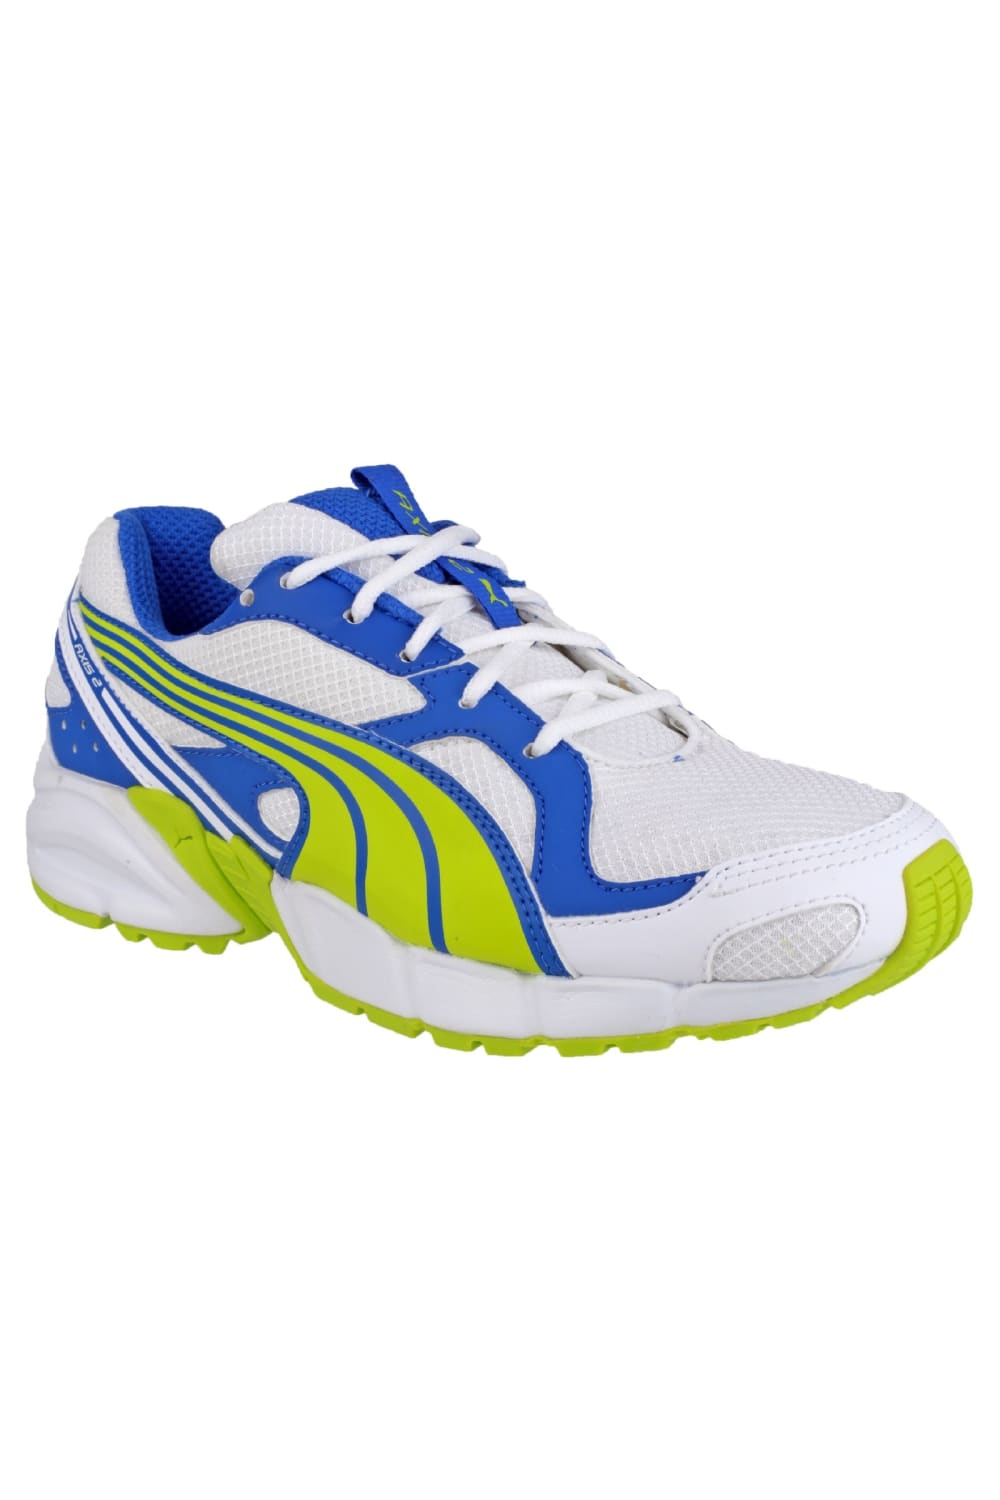 Puma Axis Mesh V2 Lace Up Big Boys Sneakers (Lime/Blue)